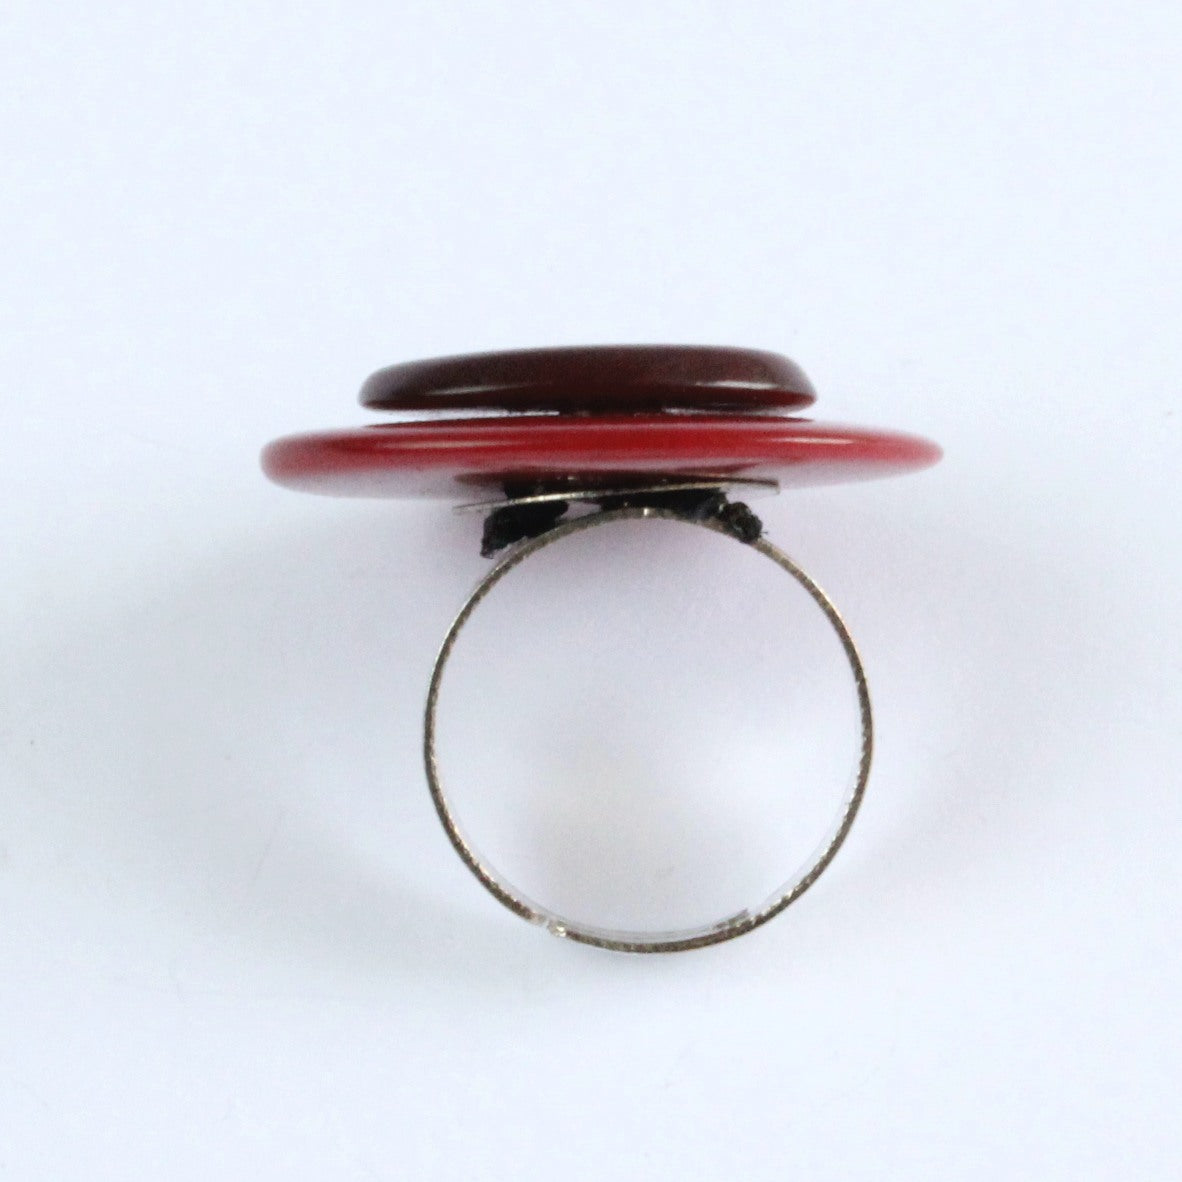 Handmade ring, tagua nut, adjustable ring size, red